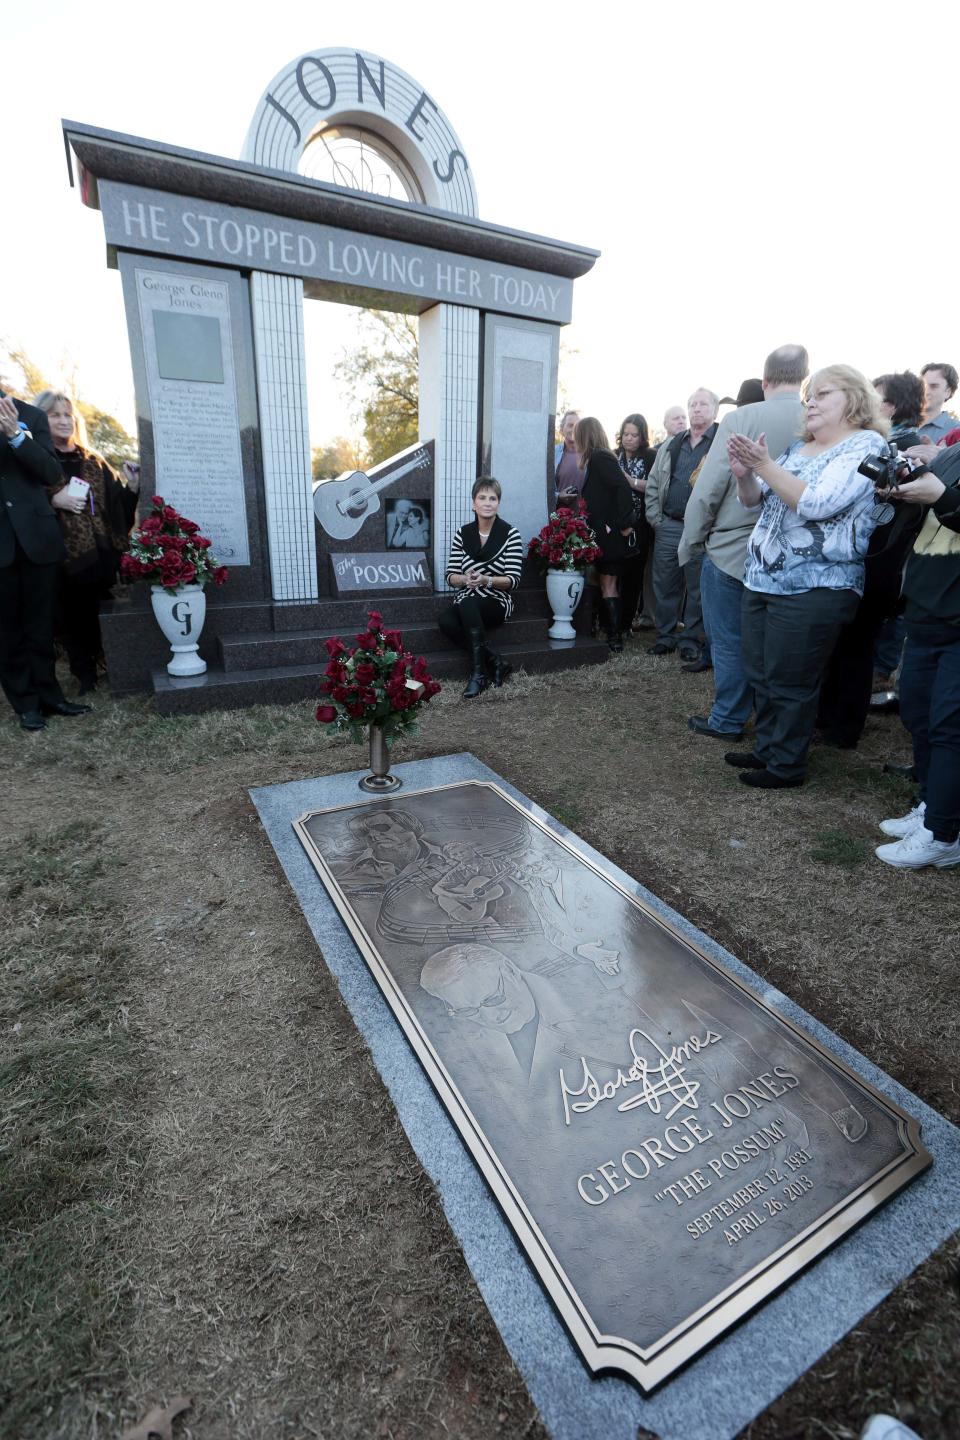 Nancy Jones, widow of country music star George Jones, listens as the Jones Boys band plays as she sits at the memorial unveiled at the late singer's grave on Monday, Nov. 18, 2013, in Nashville, Tenn. Nancy Jones spoke at the monument's dedication and announced a scholarship in her late husband's name at Middle Tennessee State University. George Jones died April 26. (AP Photo/Mark Humphrey)